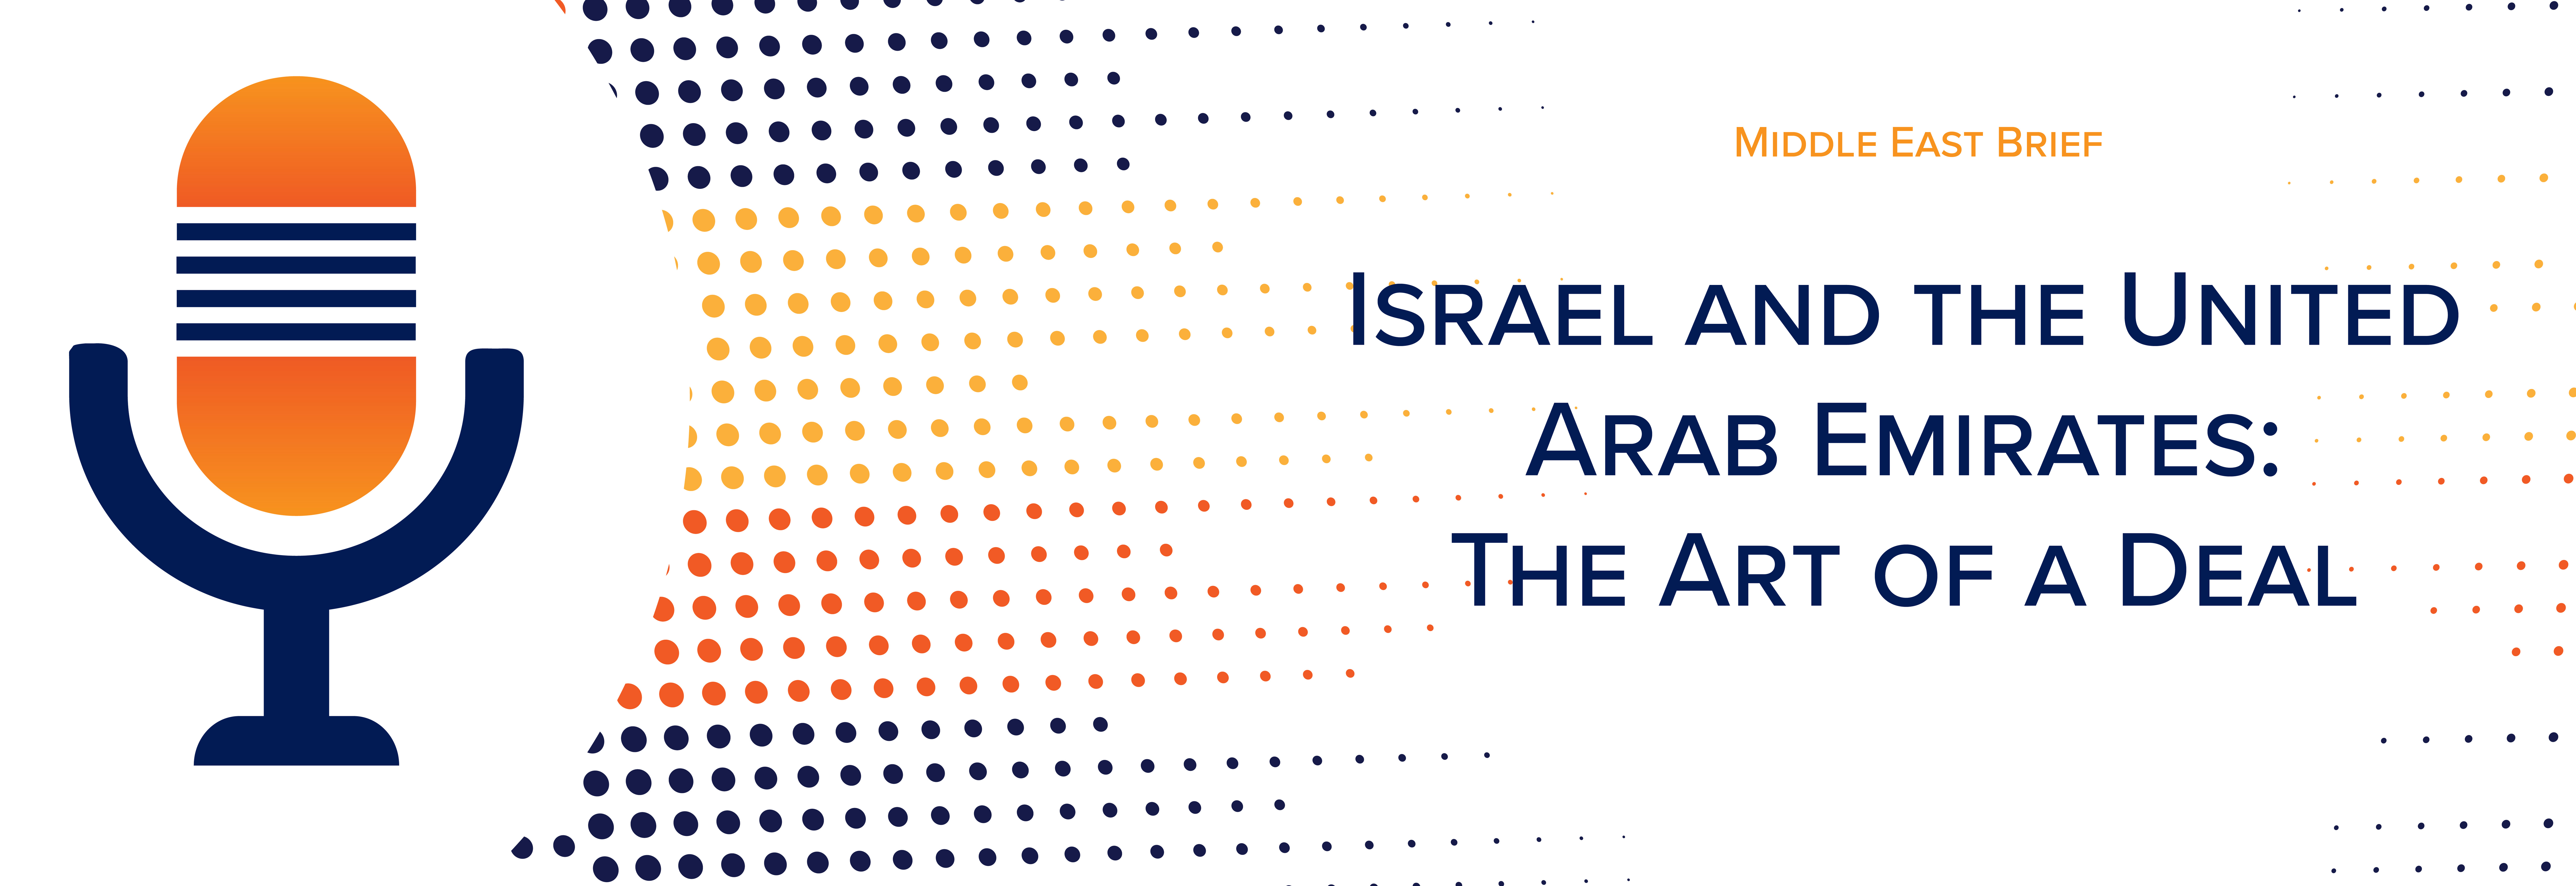 Israel and the United Arab Emirates: The Art of a Deal